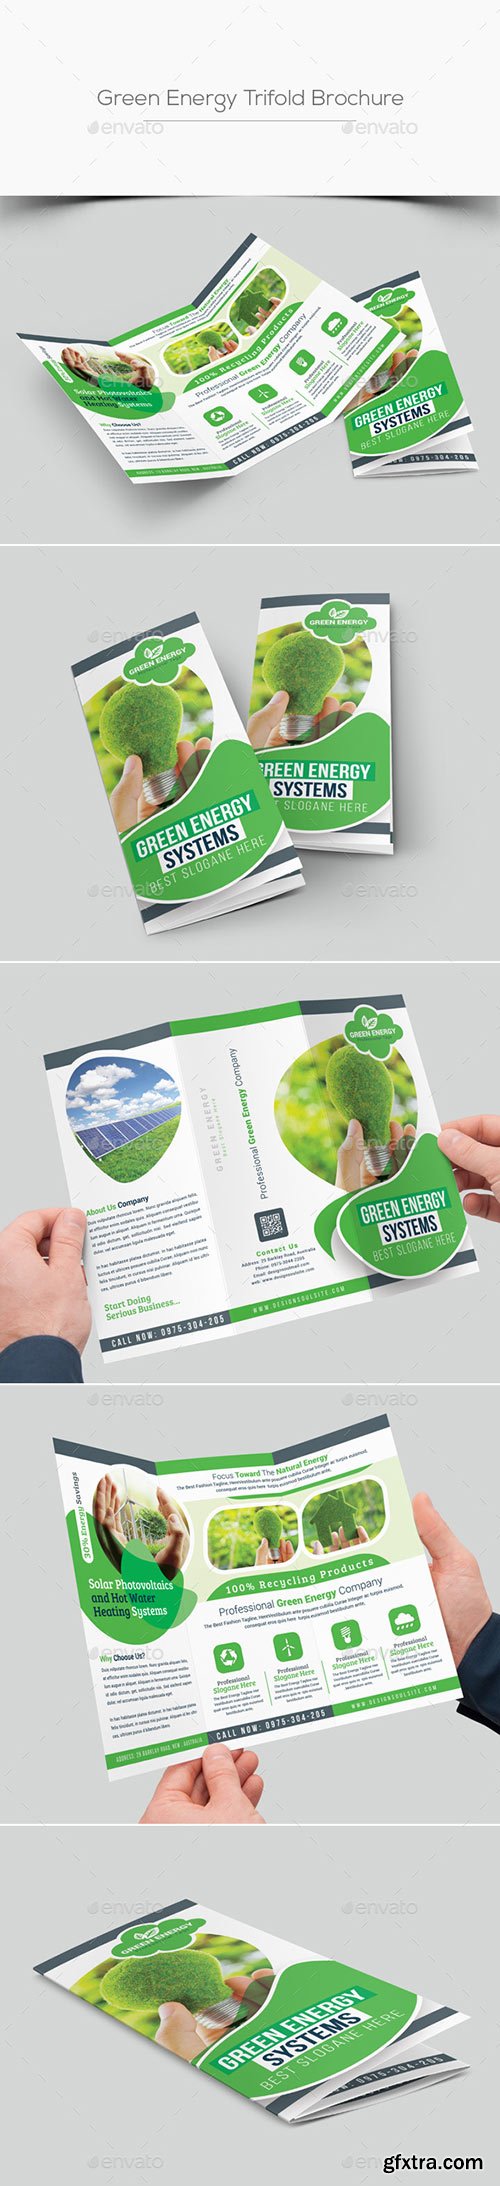 Graphicriver - Green Energy Trifold Brochure 20391733